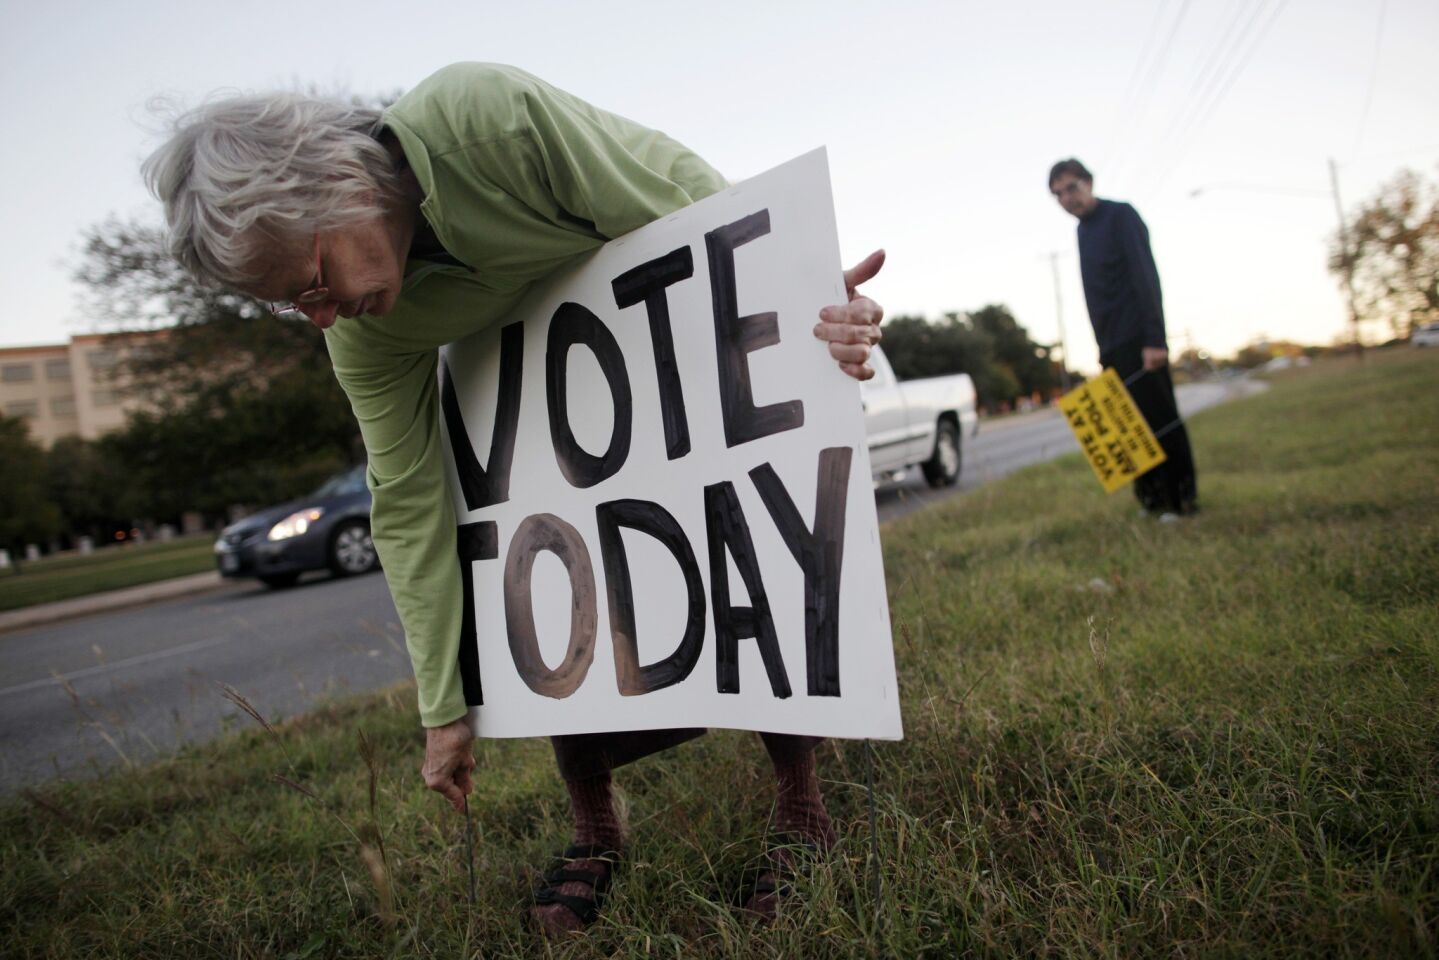 Carol, left, and Amon Burton place signs on Lamar Boulevard before polls open in Austin, Texas.